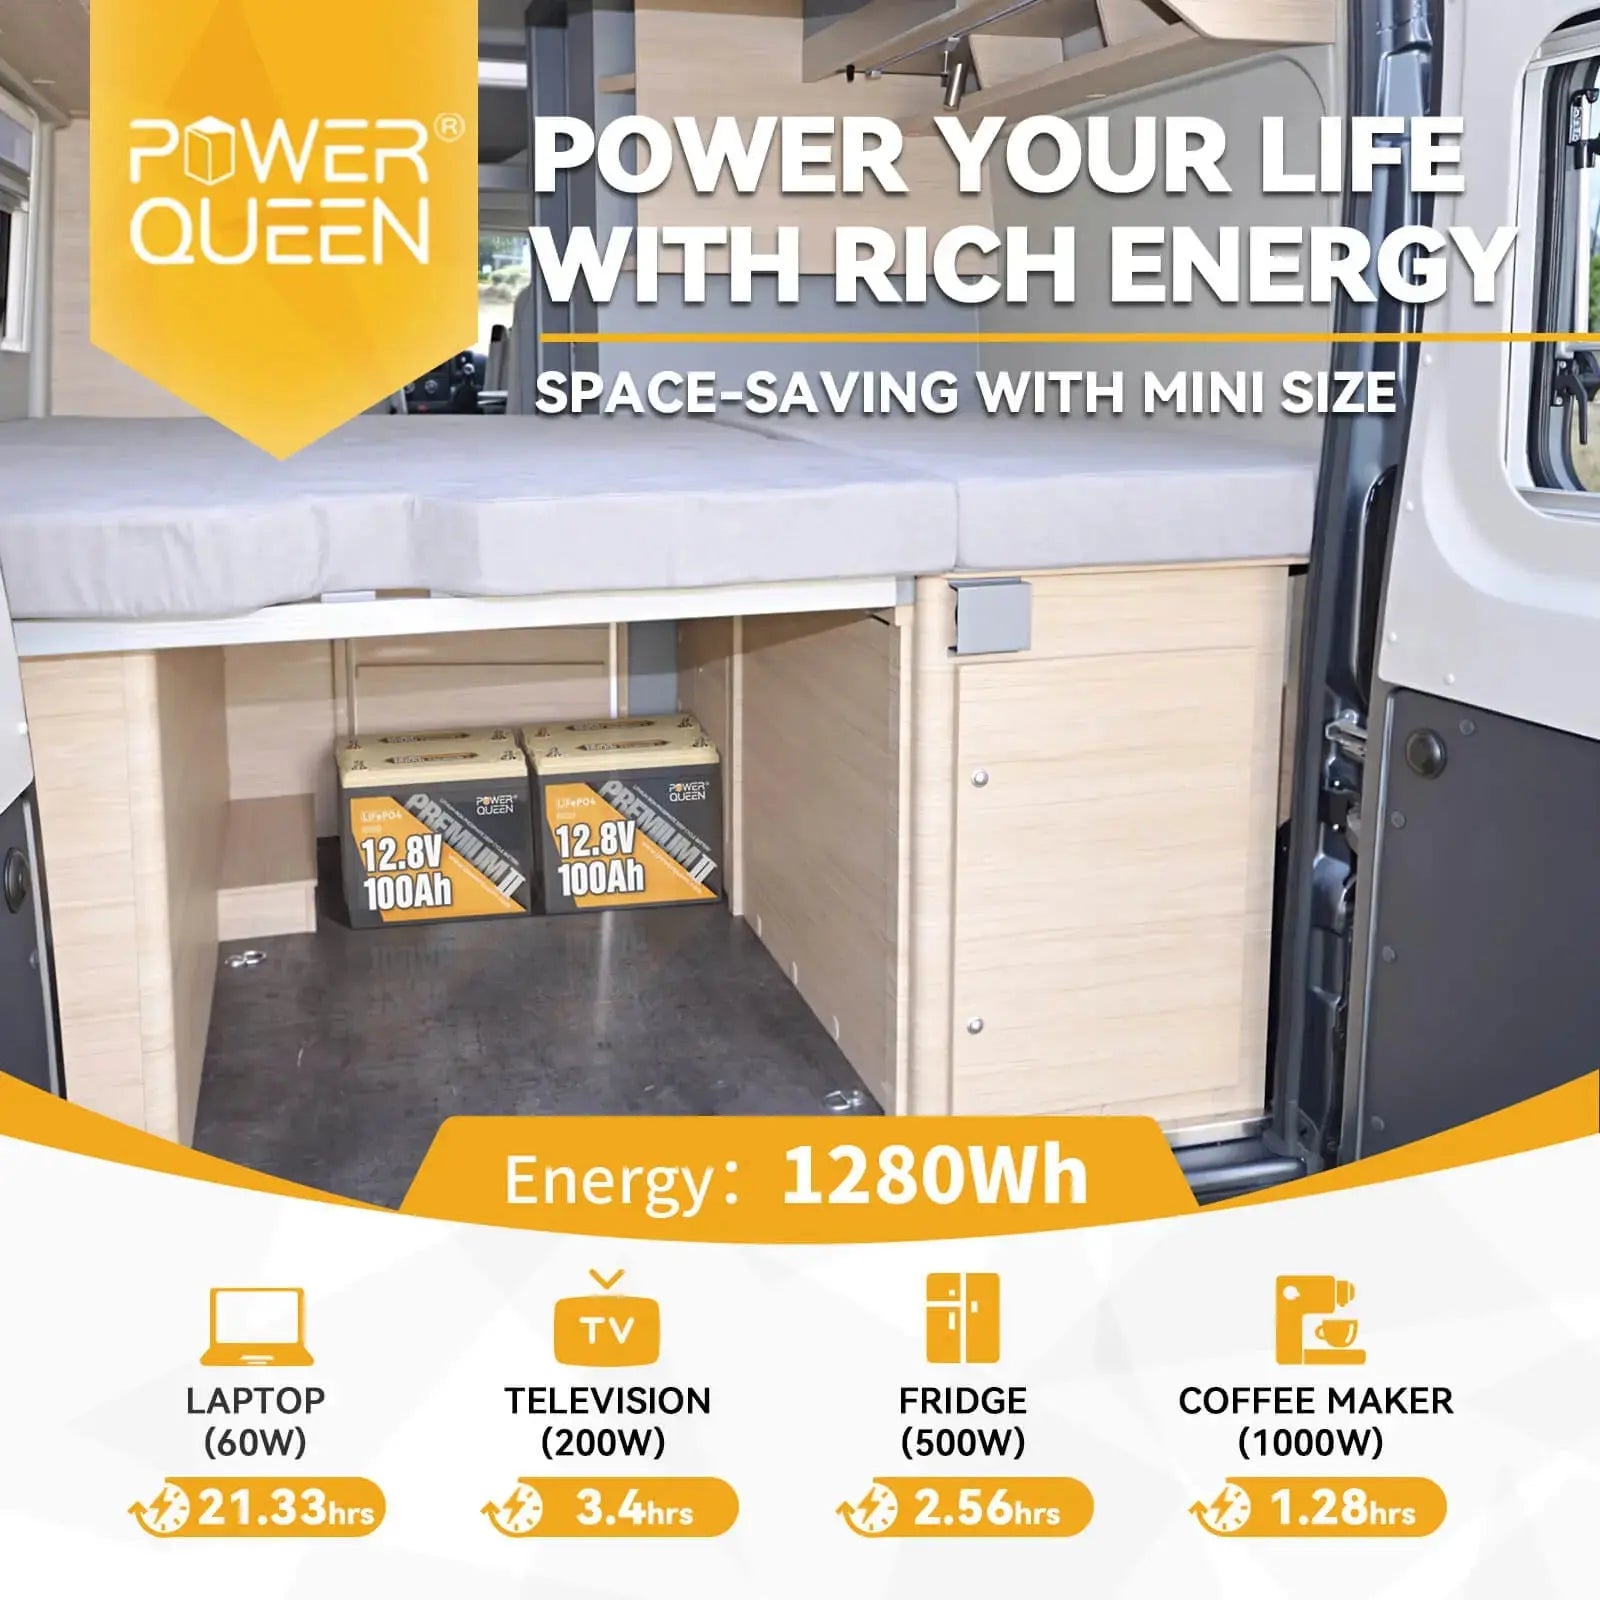 Power Queen 12.8V 100Ah Mini LiFePO4 Battery+14.6V 20A Charger Power Queen